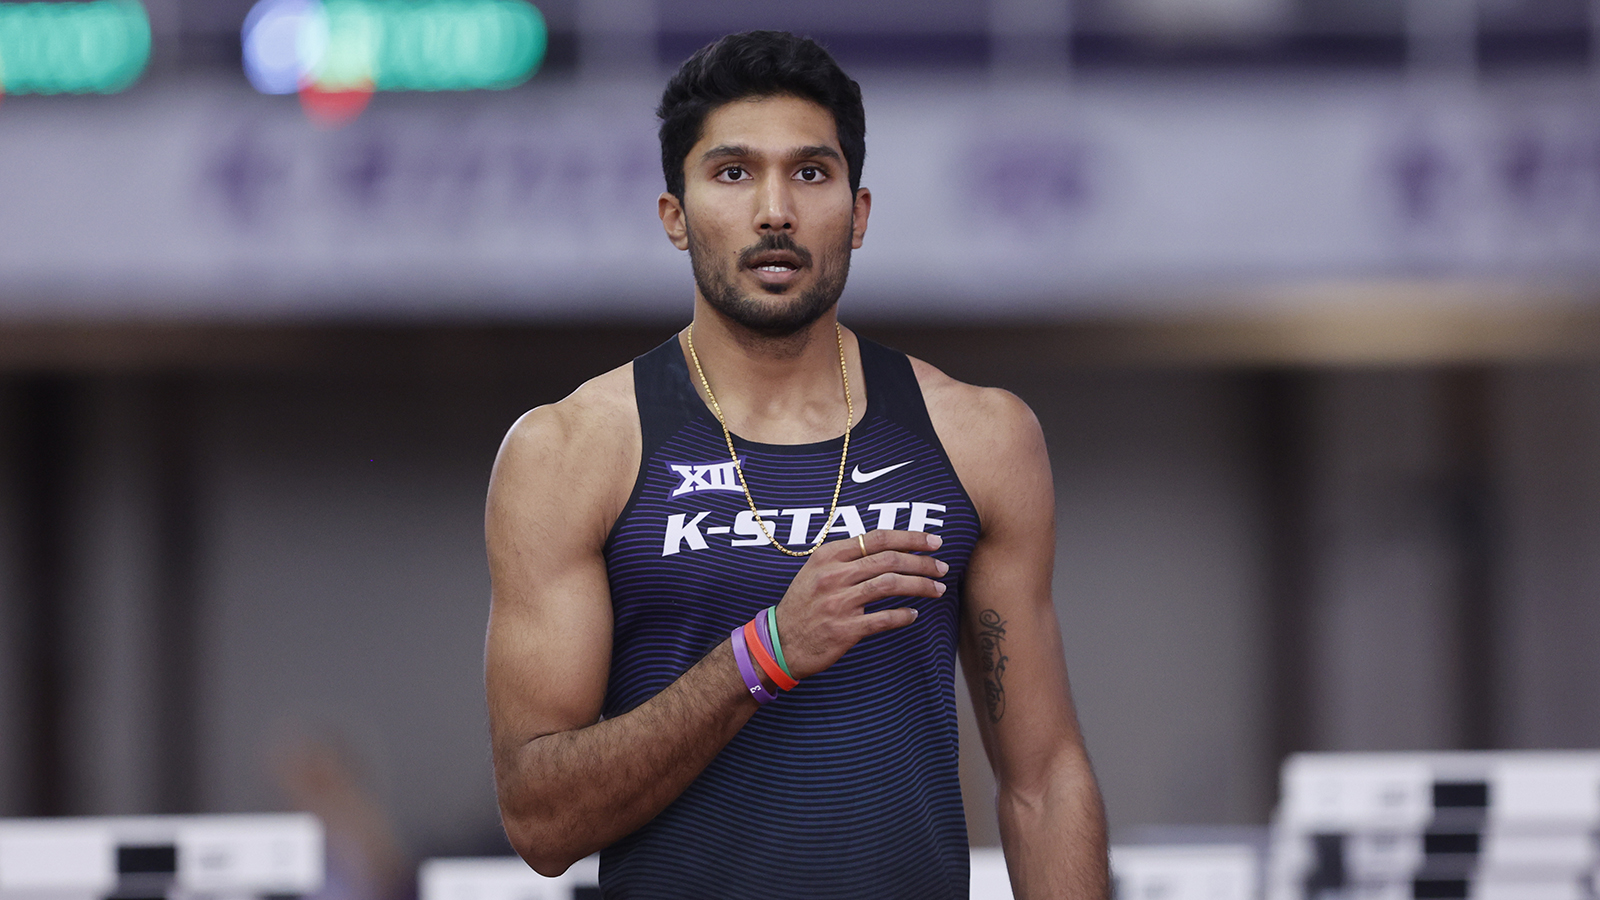 CWG 2022 LIVE: From watching CWG 2022 opening ceremony on TV at his home to winning Bronze medal in High Jump, Check Out Tejaswin Shankar's incredible journey  